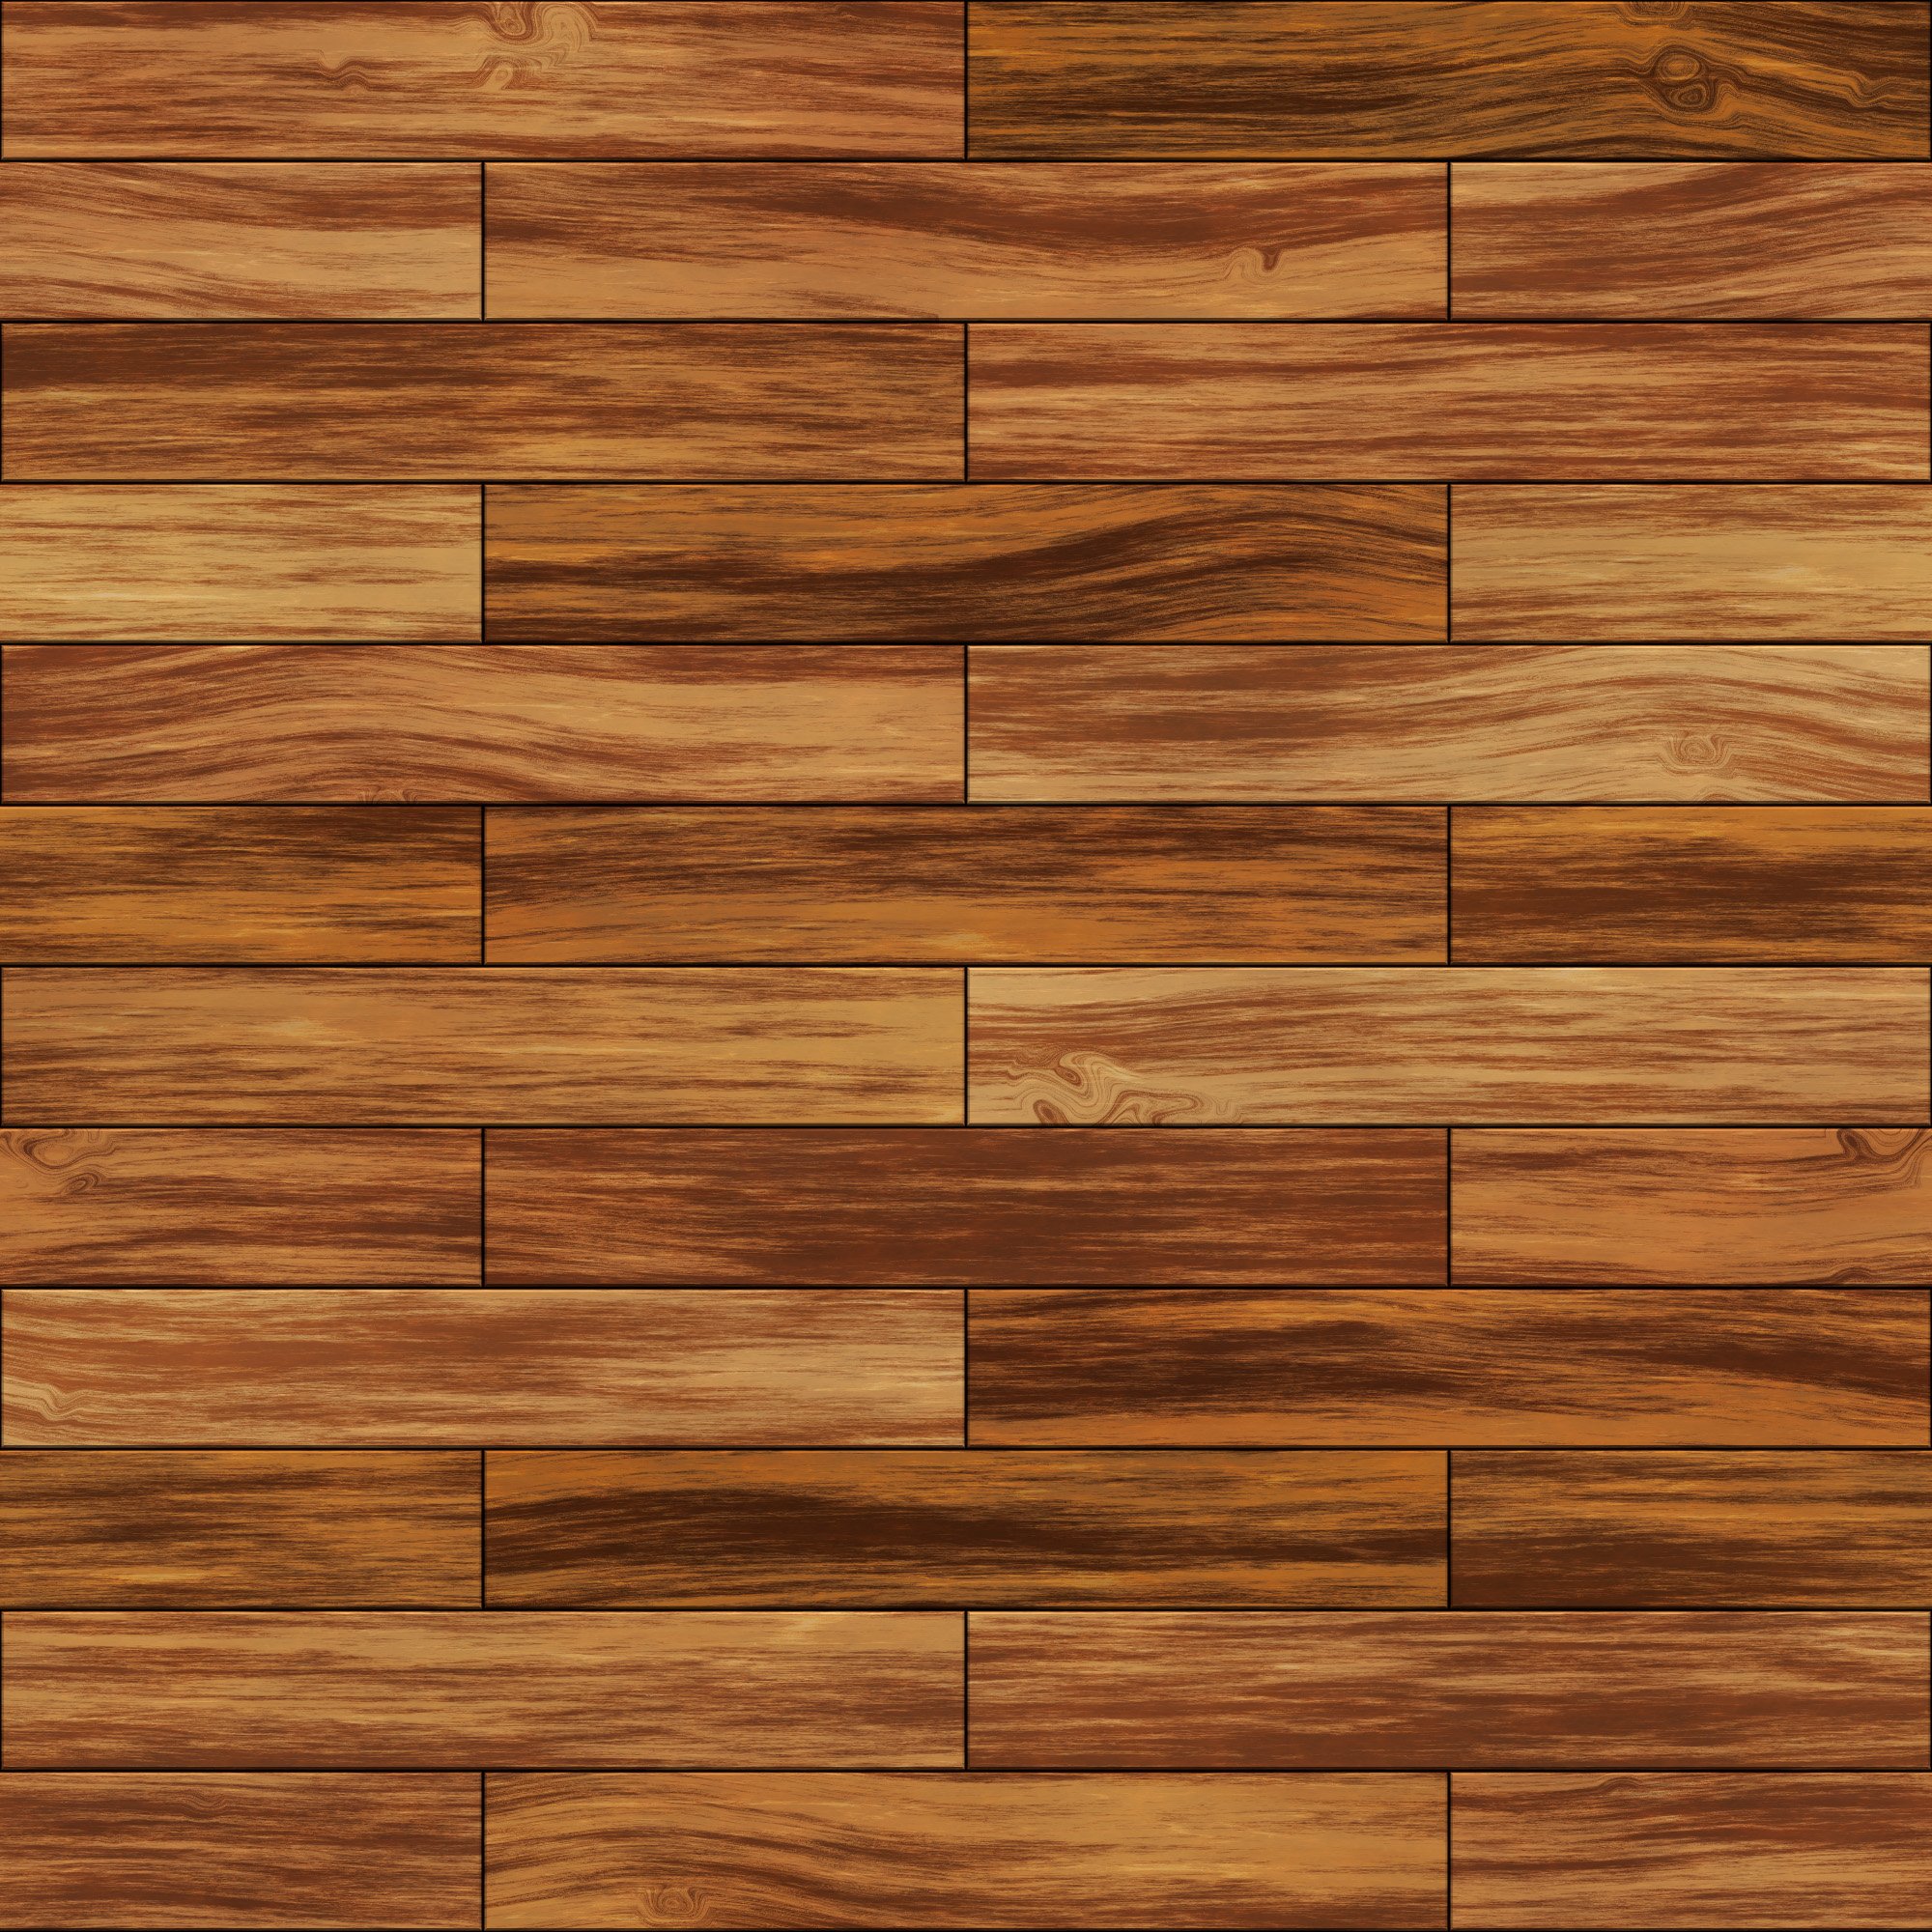  Wood Textures wooden background seamless wood floor background image 2000x2000